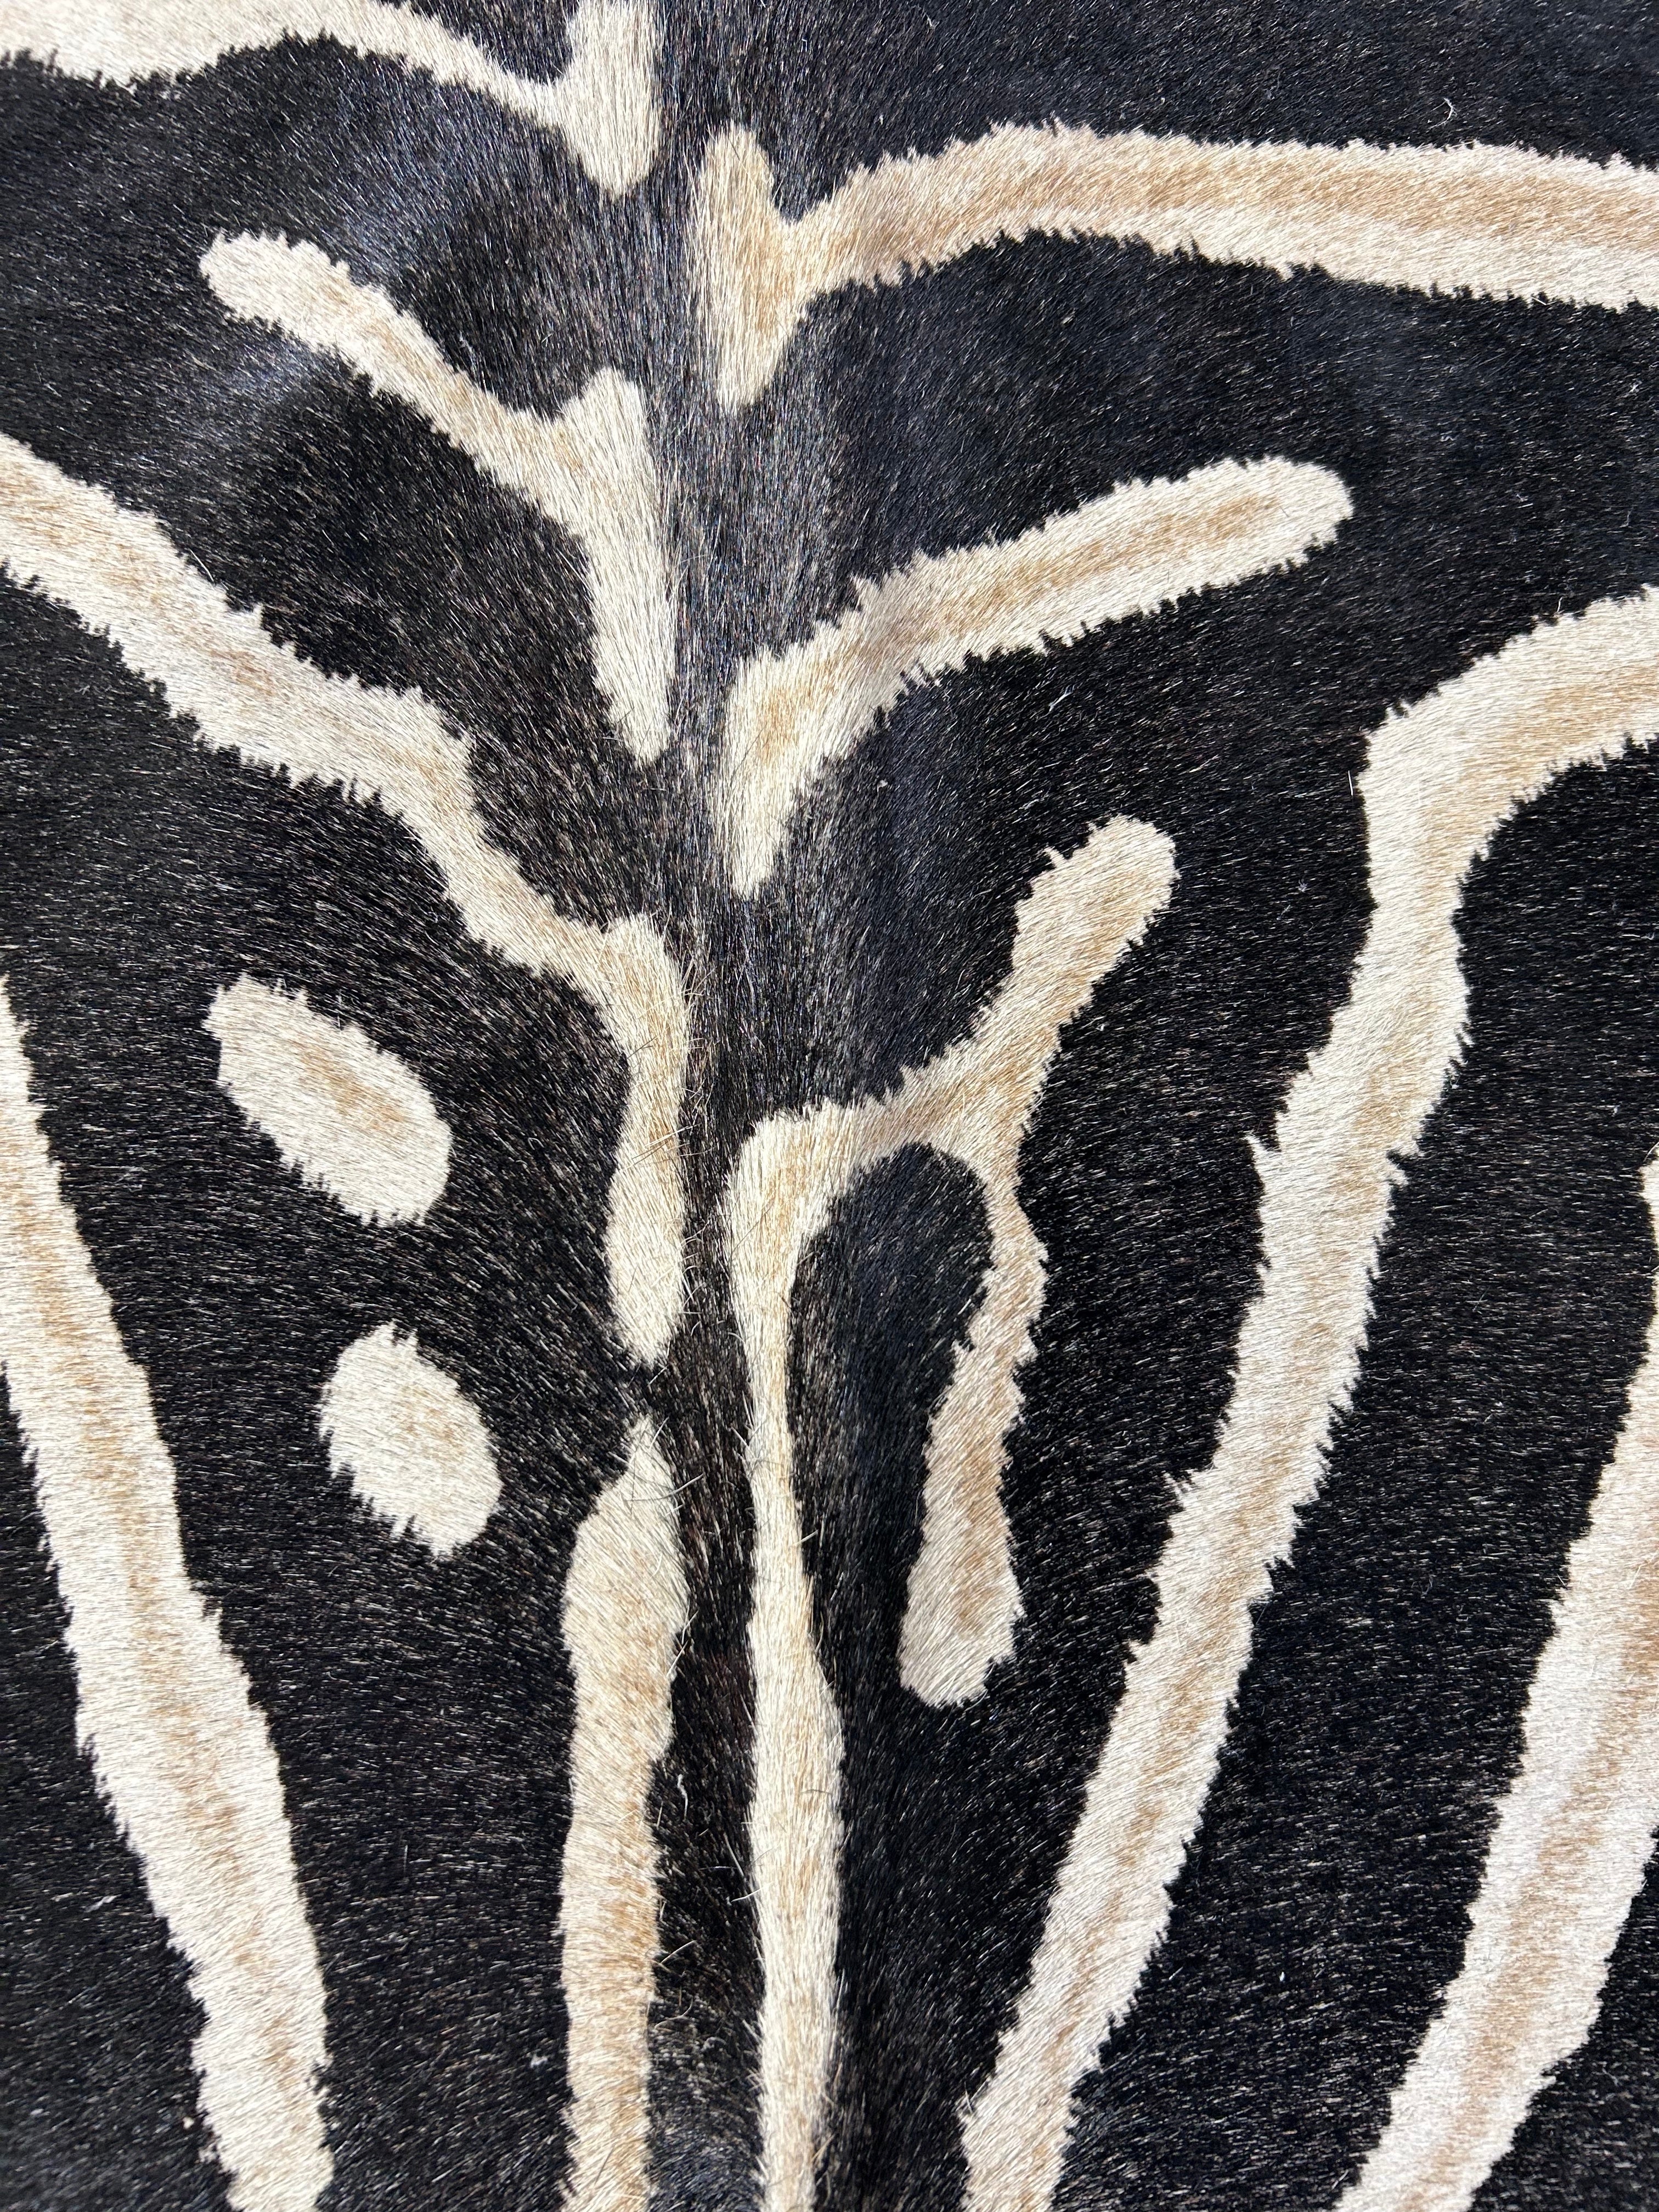 Genuine Zebra Print Cowhide Rug (inner stripes are light brown/black stripes are a bit faded in center of the hide) Size: 7x5.5 feet D-100